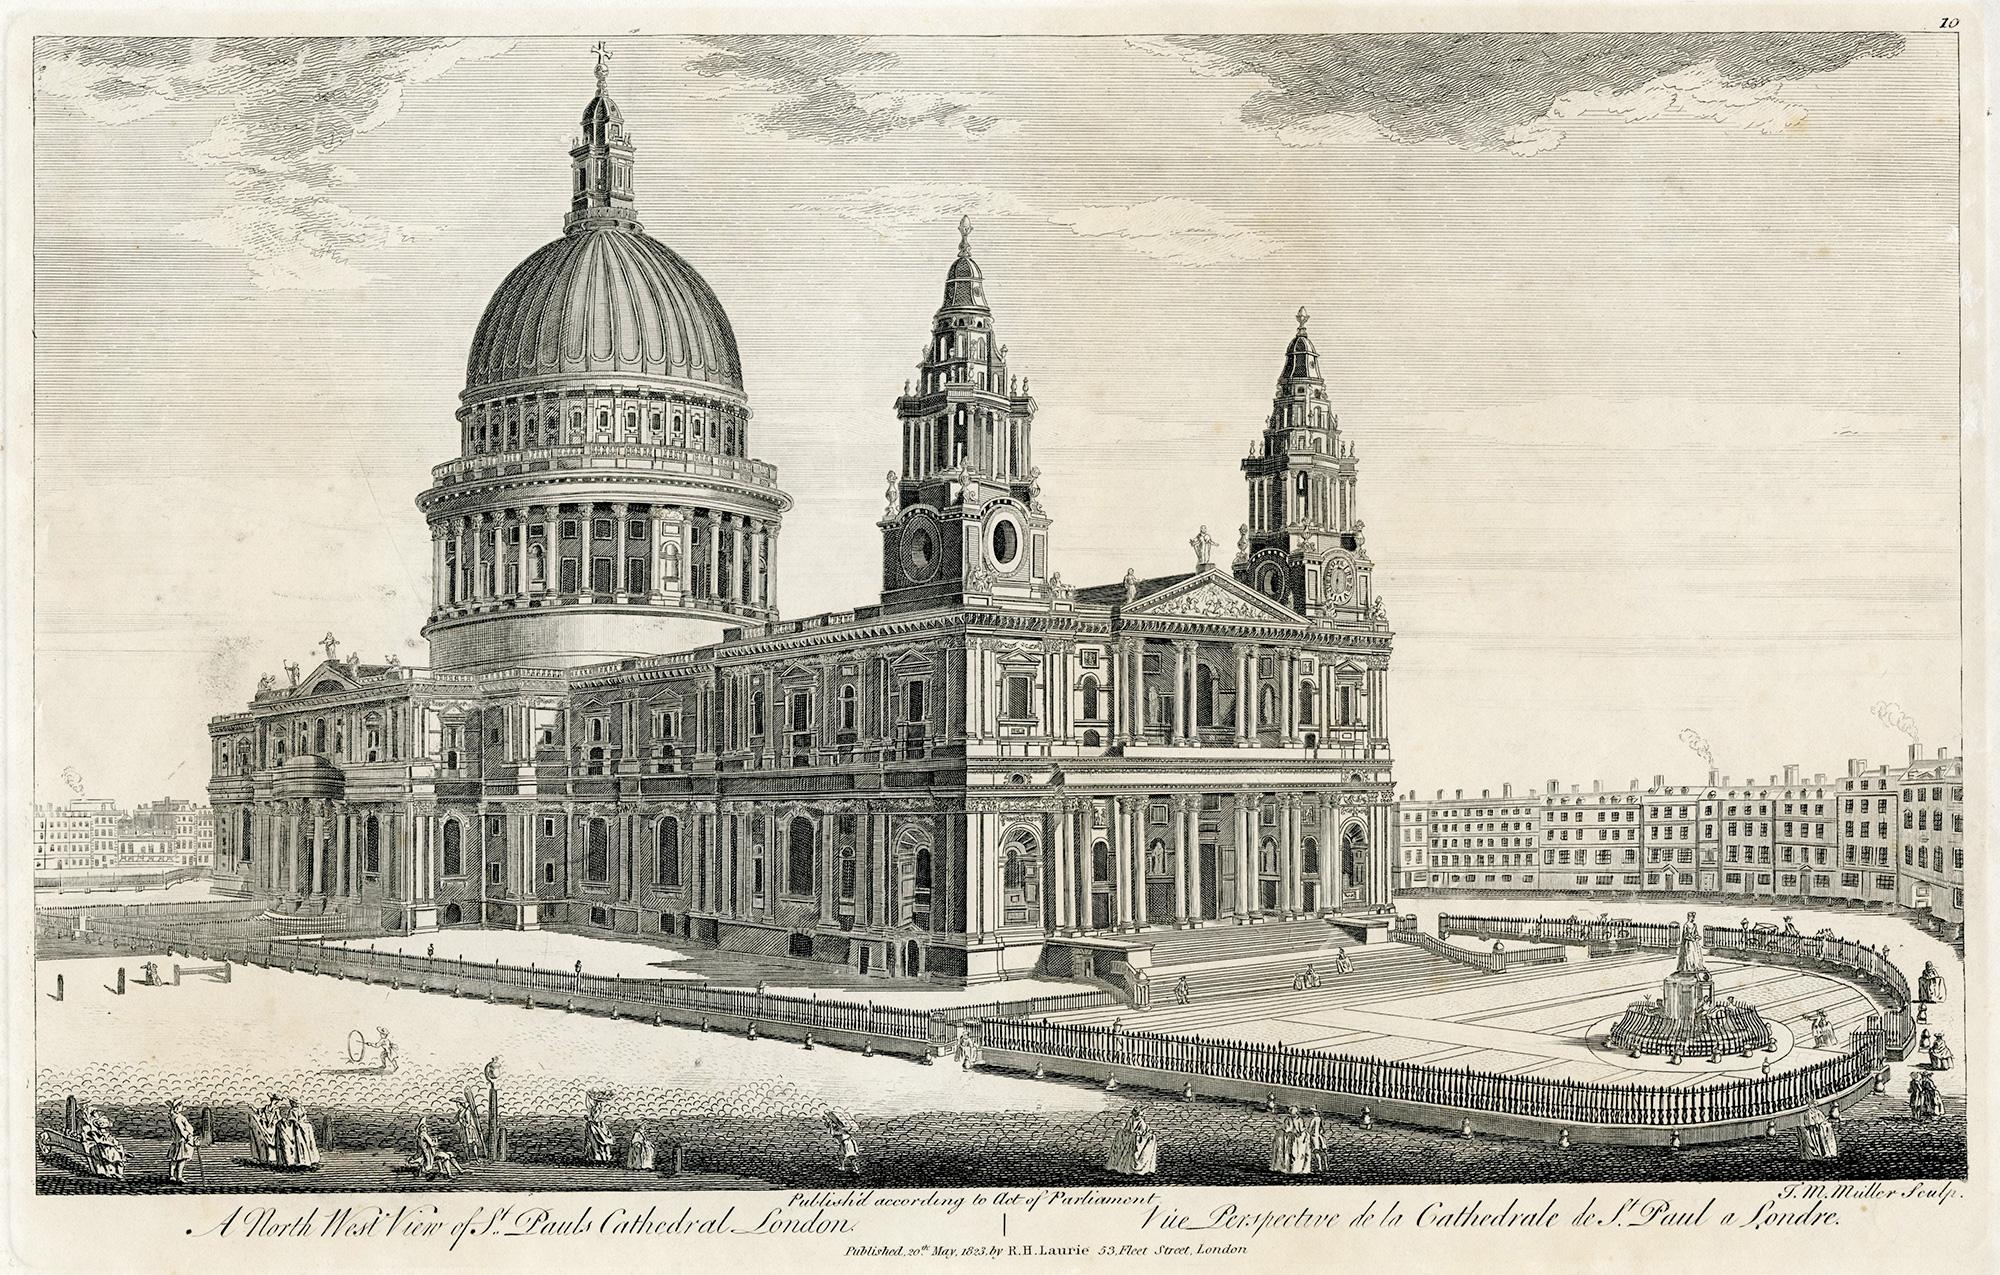 A North West View of St. Paul's Cathedral, London